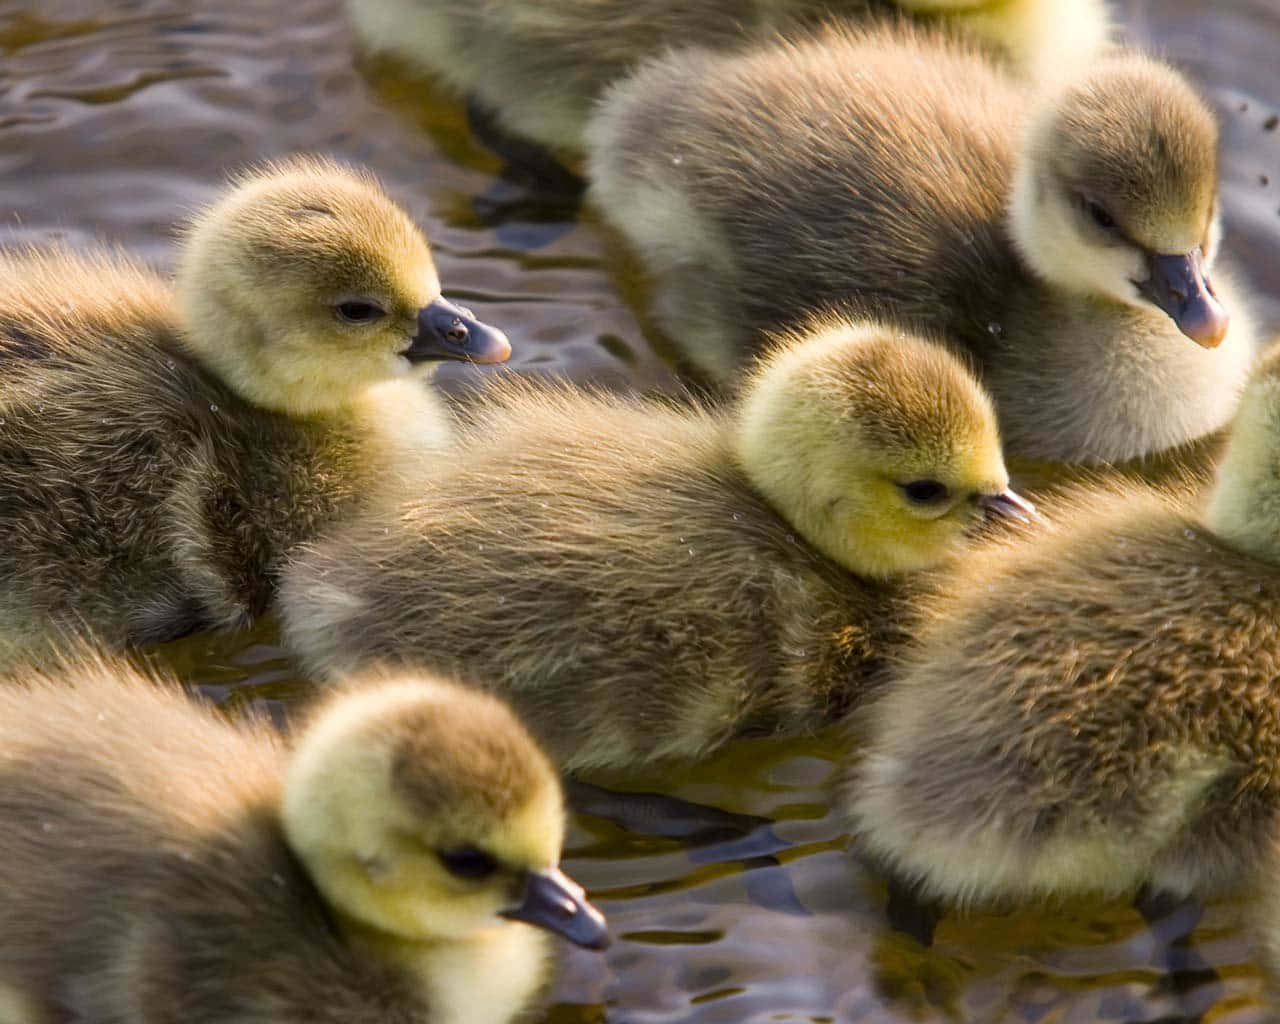 "This Cute Little Duckling Enjoys a Fun Afternoon on the Pond" Wallpaper